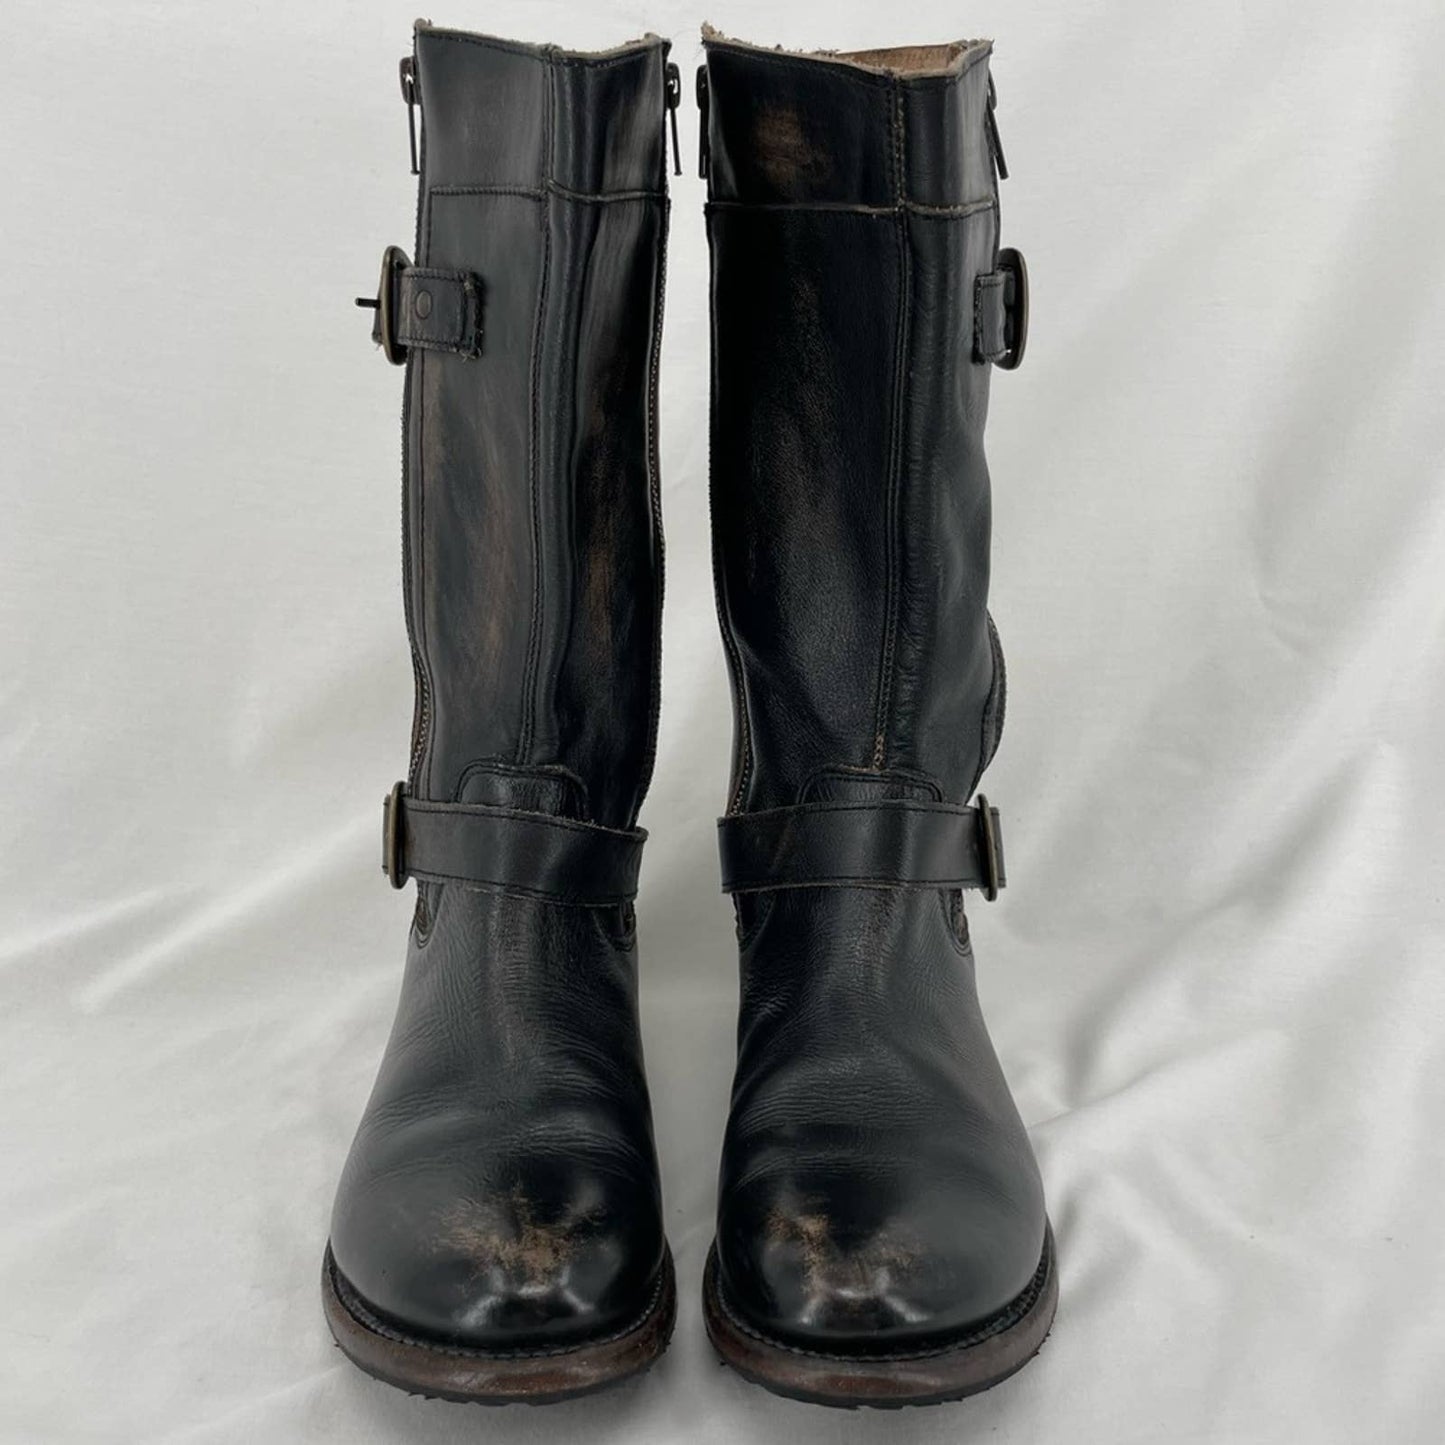 BED|STU Gogo Black Hand Washed Equestrian Engineer Double Zips Pirate Boots Size 7